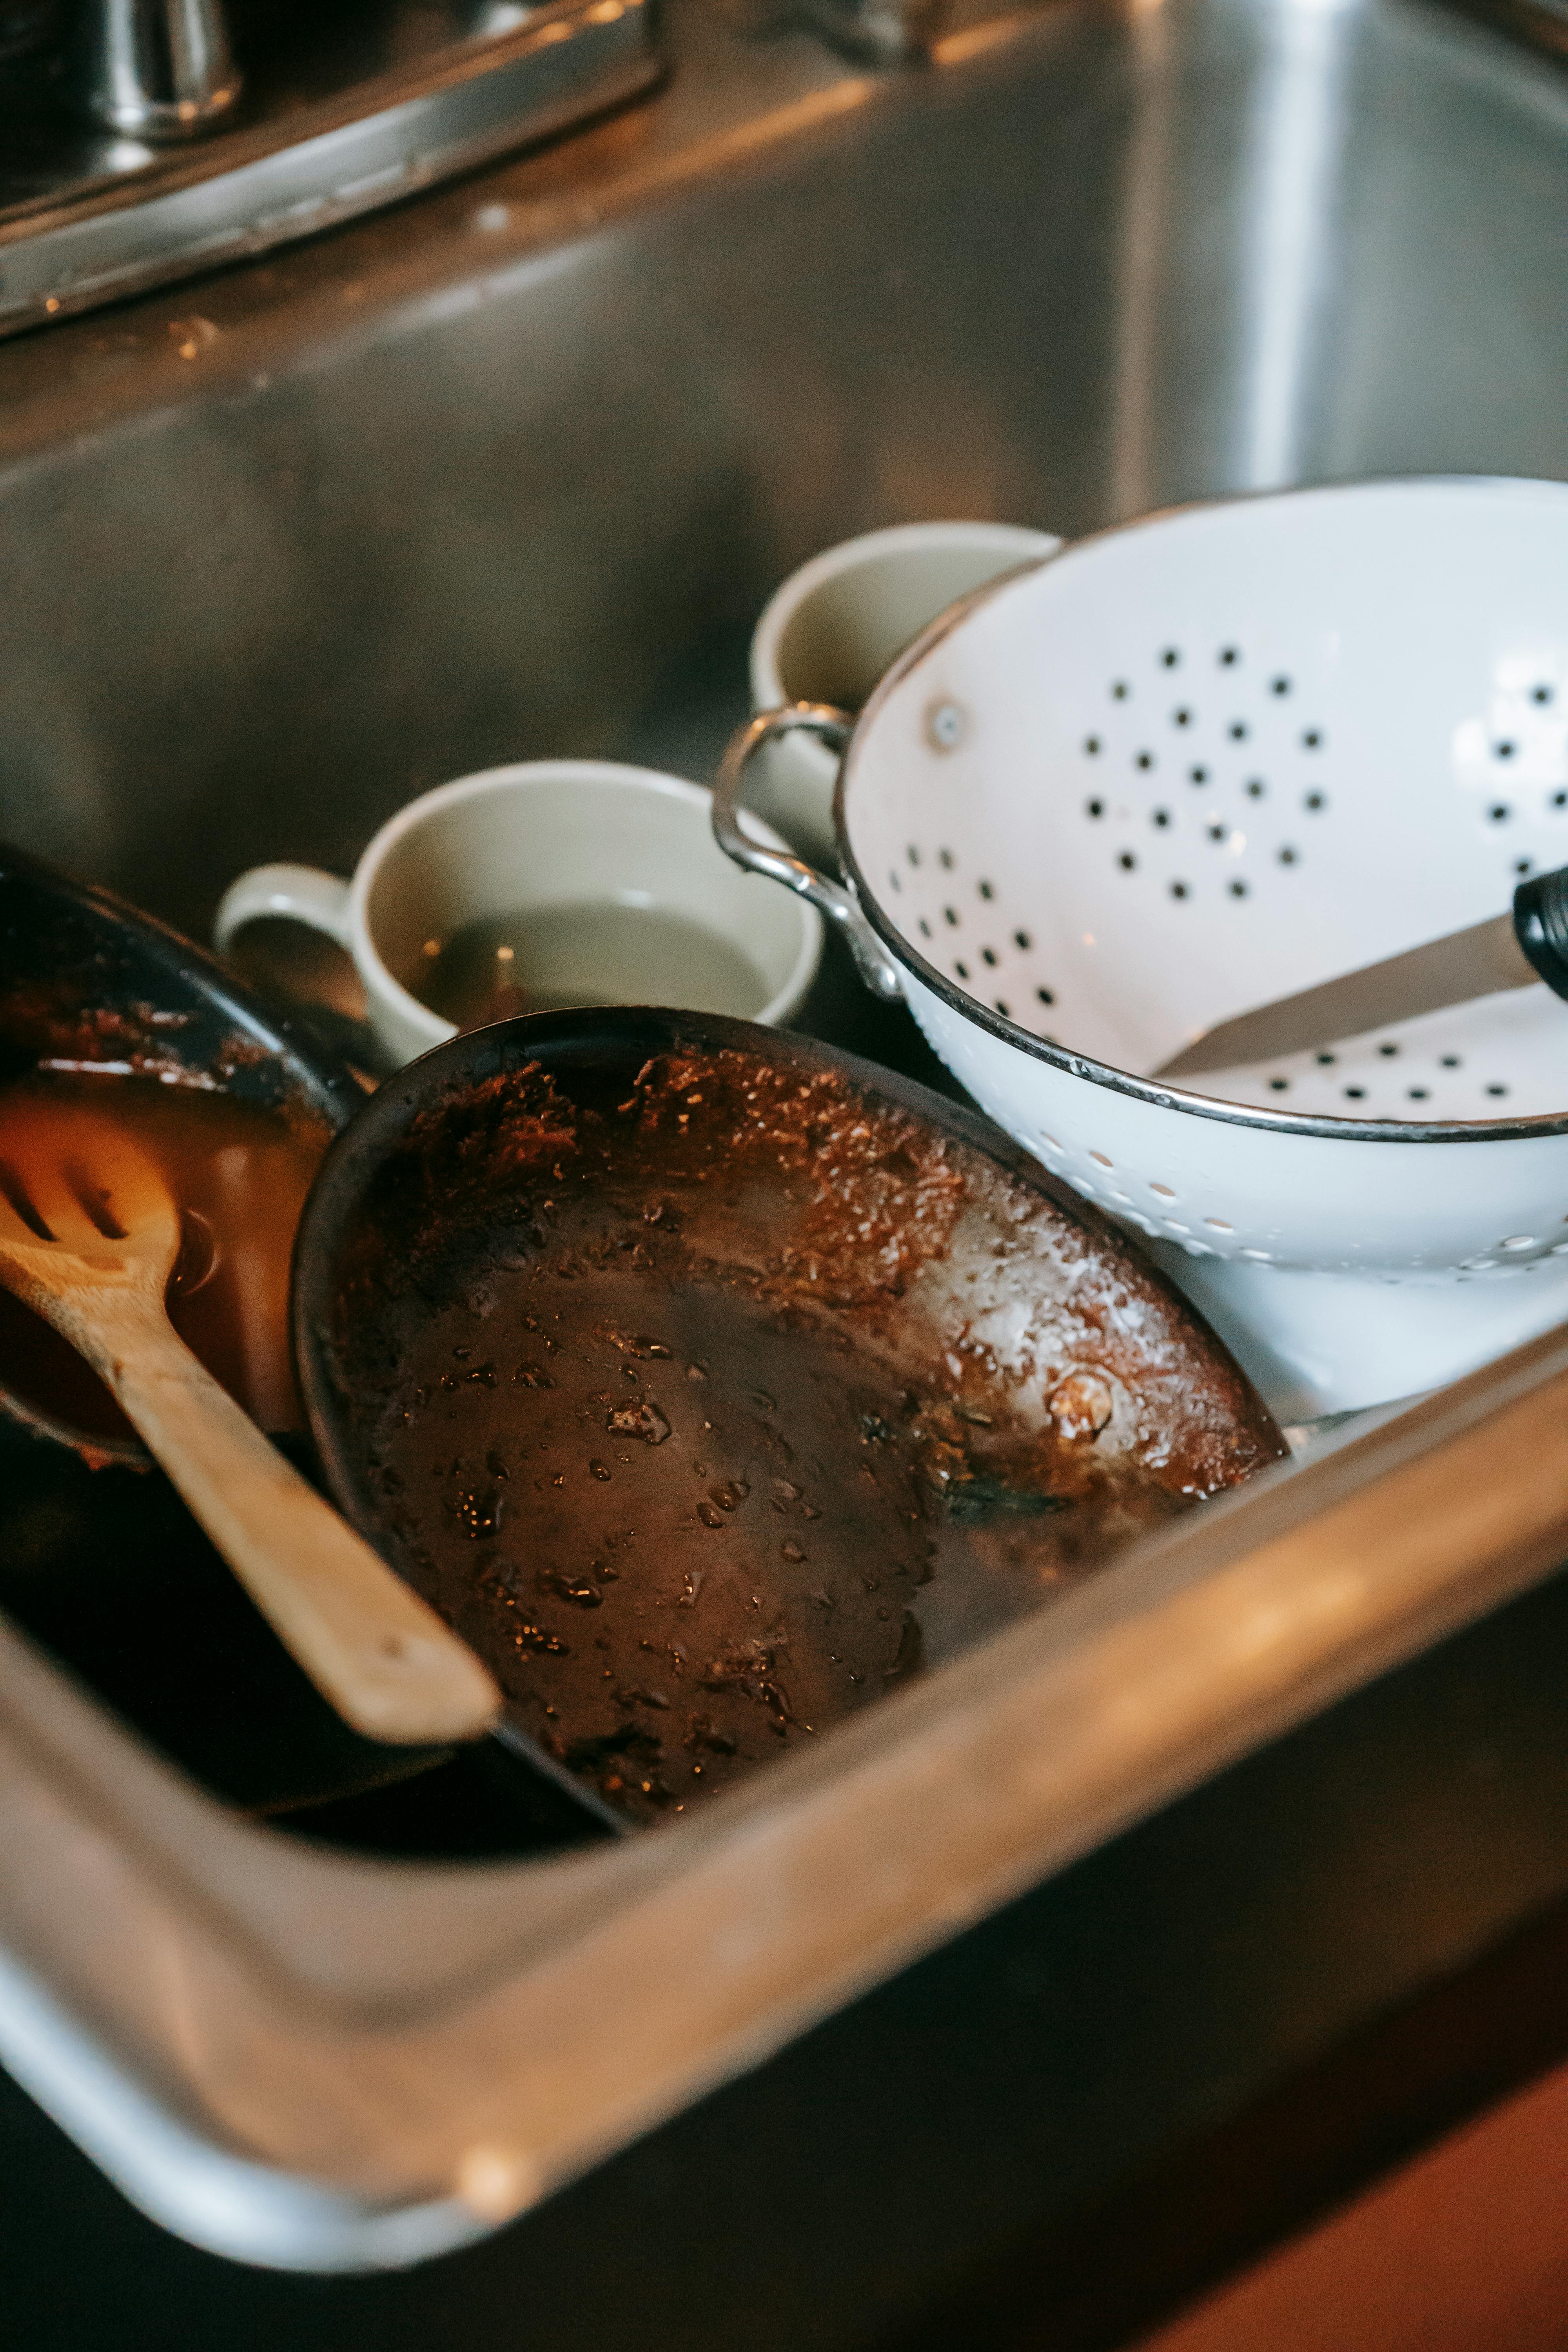 A pile of dirty dishes in the sink | Source: Pexels